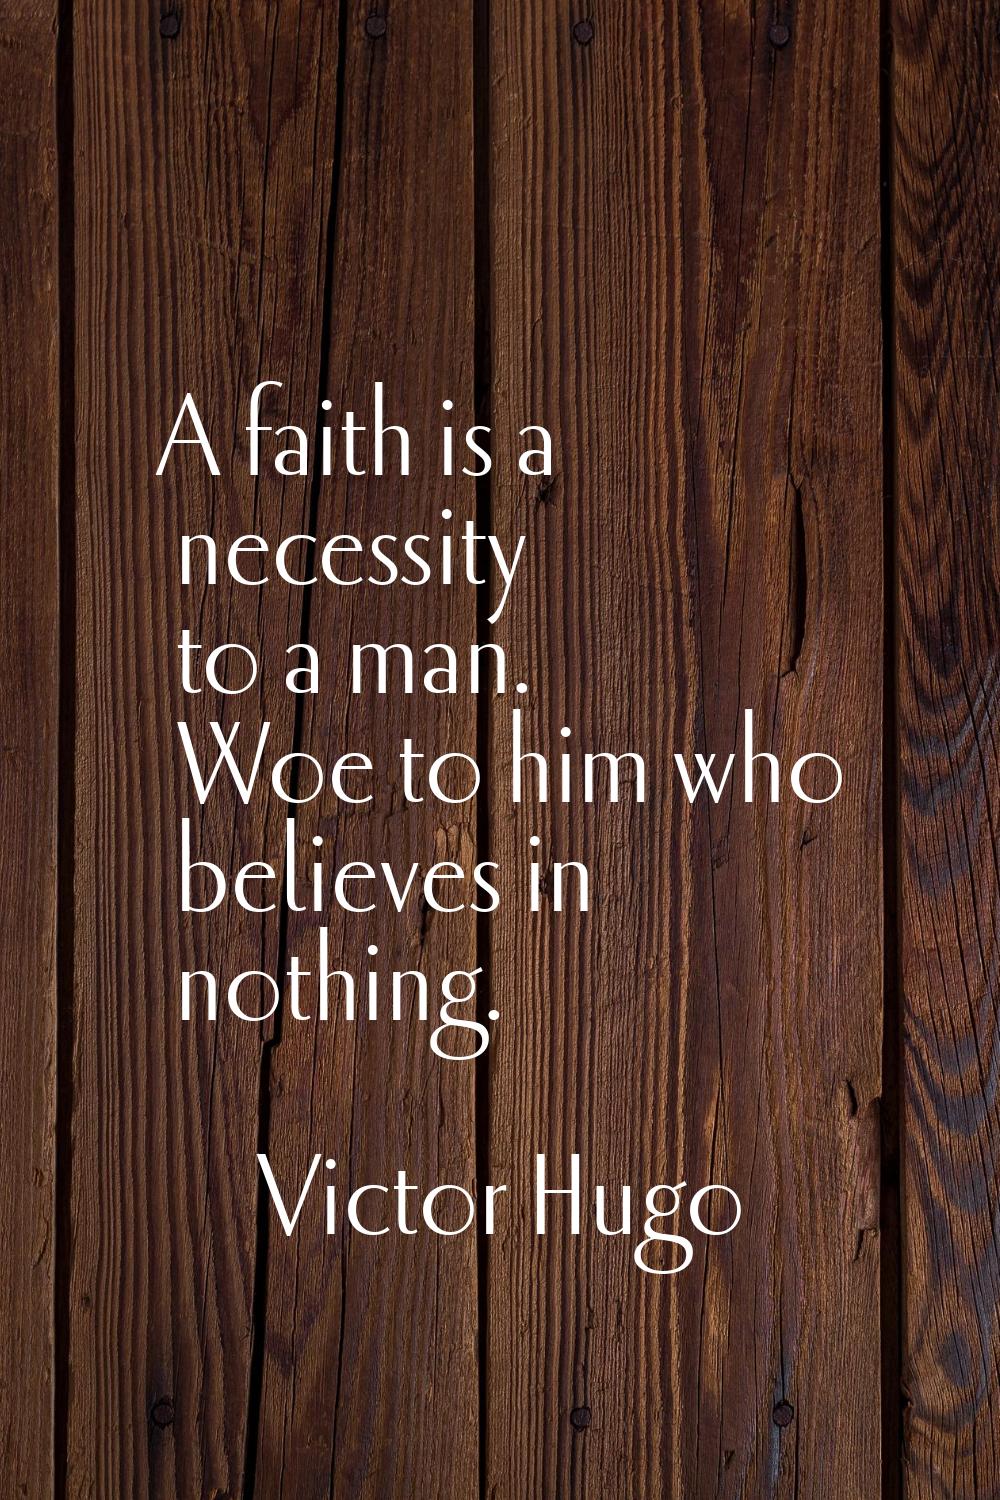 A faith is a necessity to a man. Woe to him who believes in nothing.